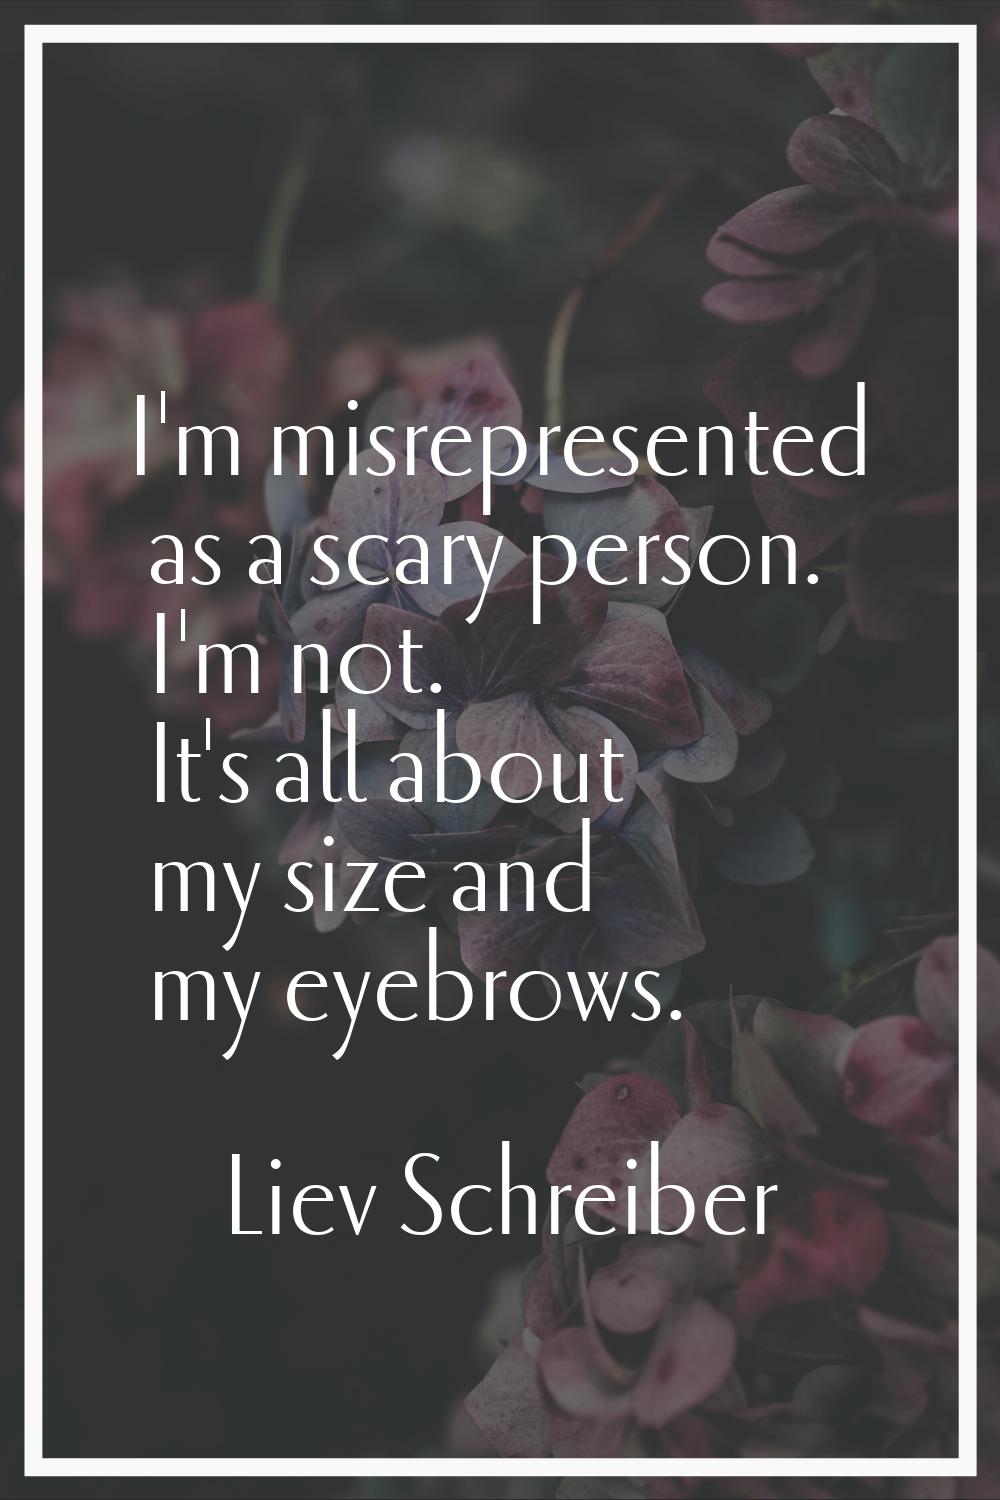 I'm misrepresented as a scary person. I'm not. It's all about my size and my eyebrows.